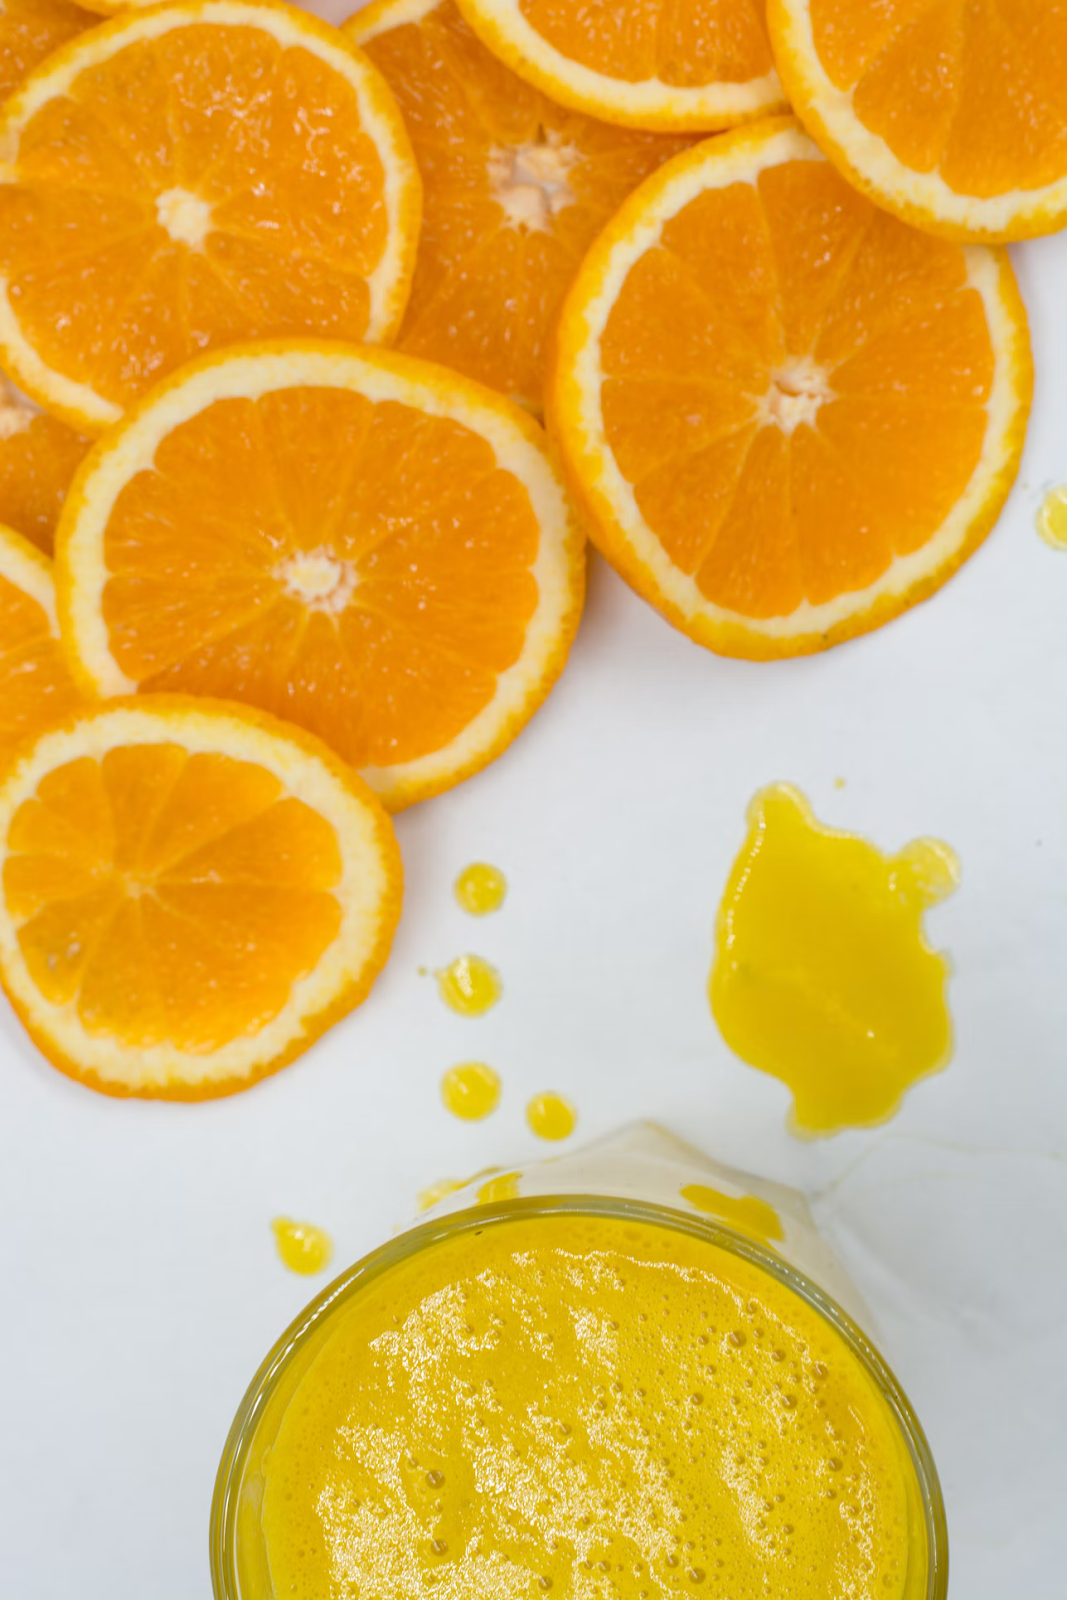 A top-down view of orange slices on a white surface above a cup of fresh orange juice.